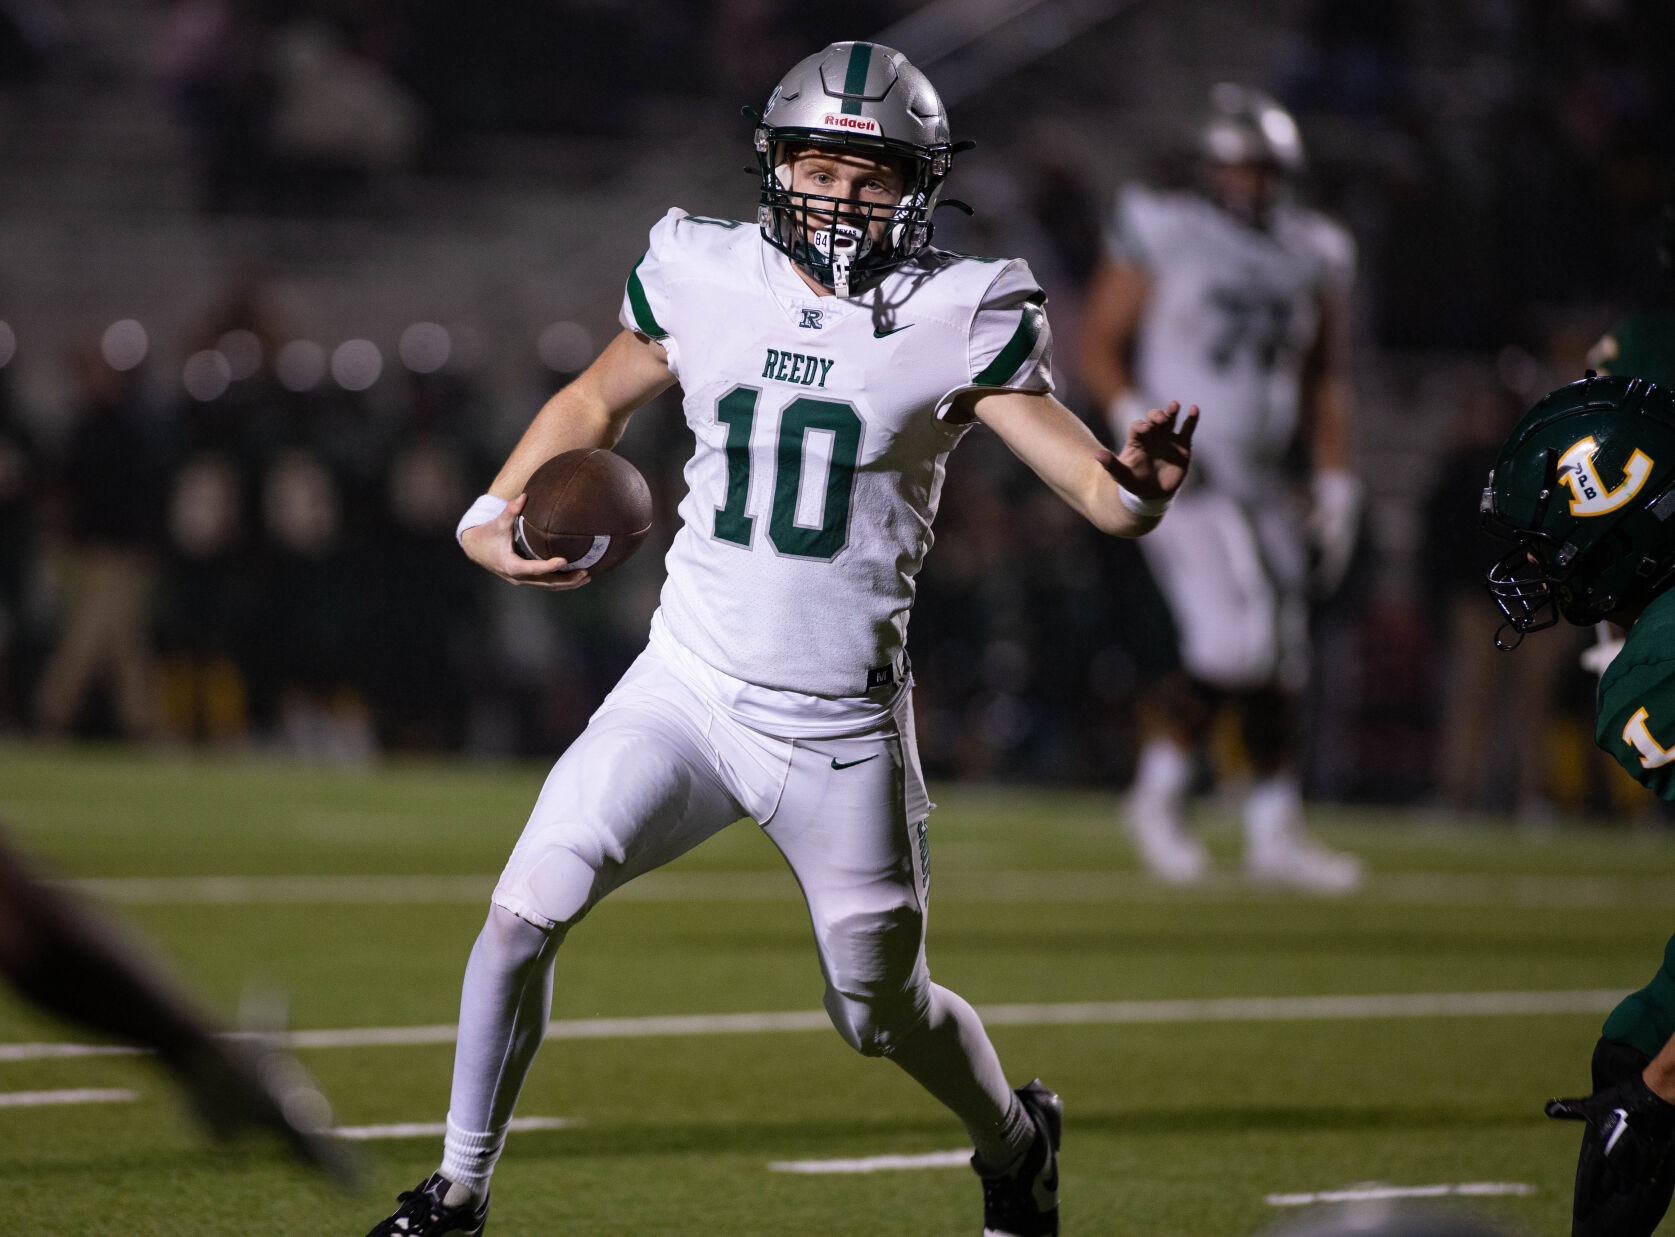 Longview Dominates Reedy in Area Finals with Crushing 52-14 Victory